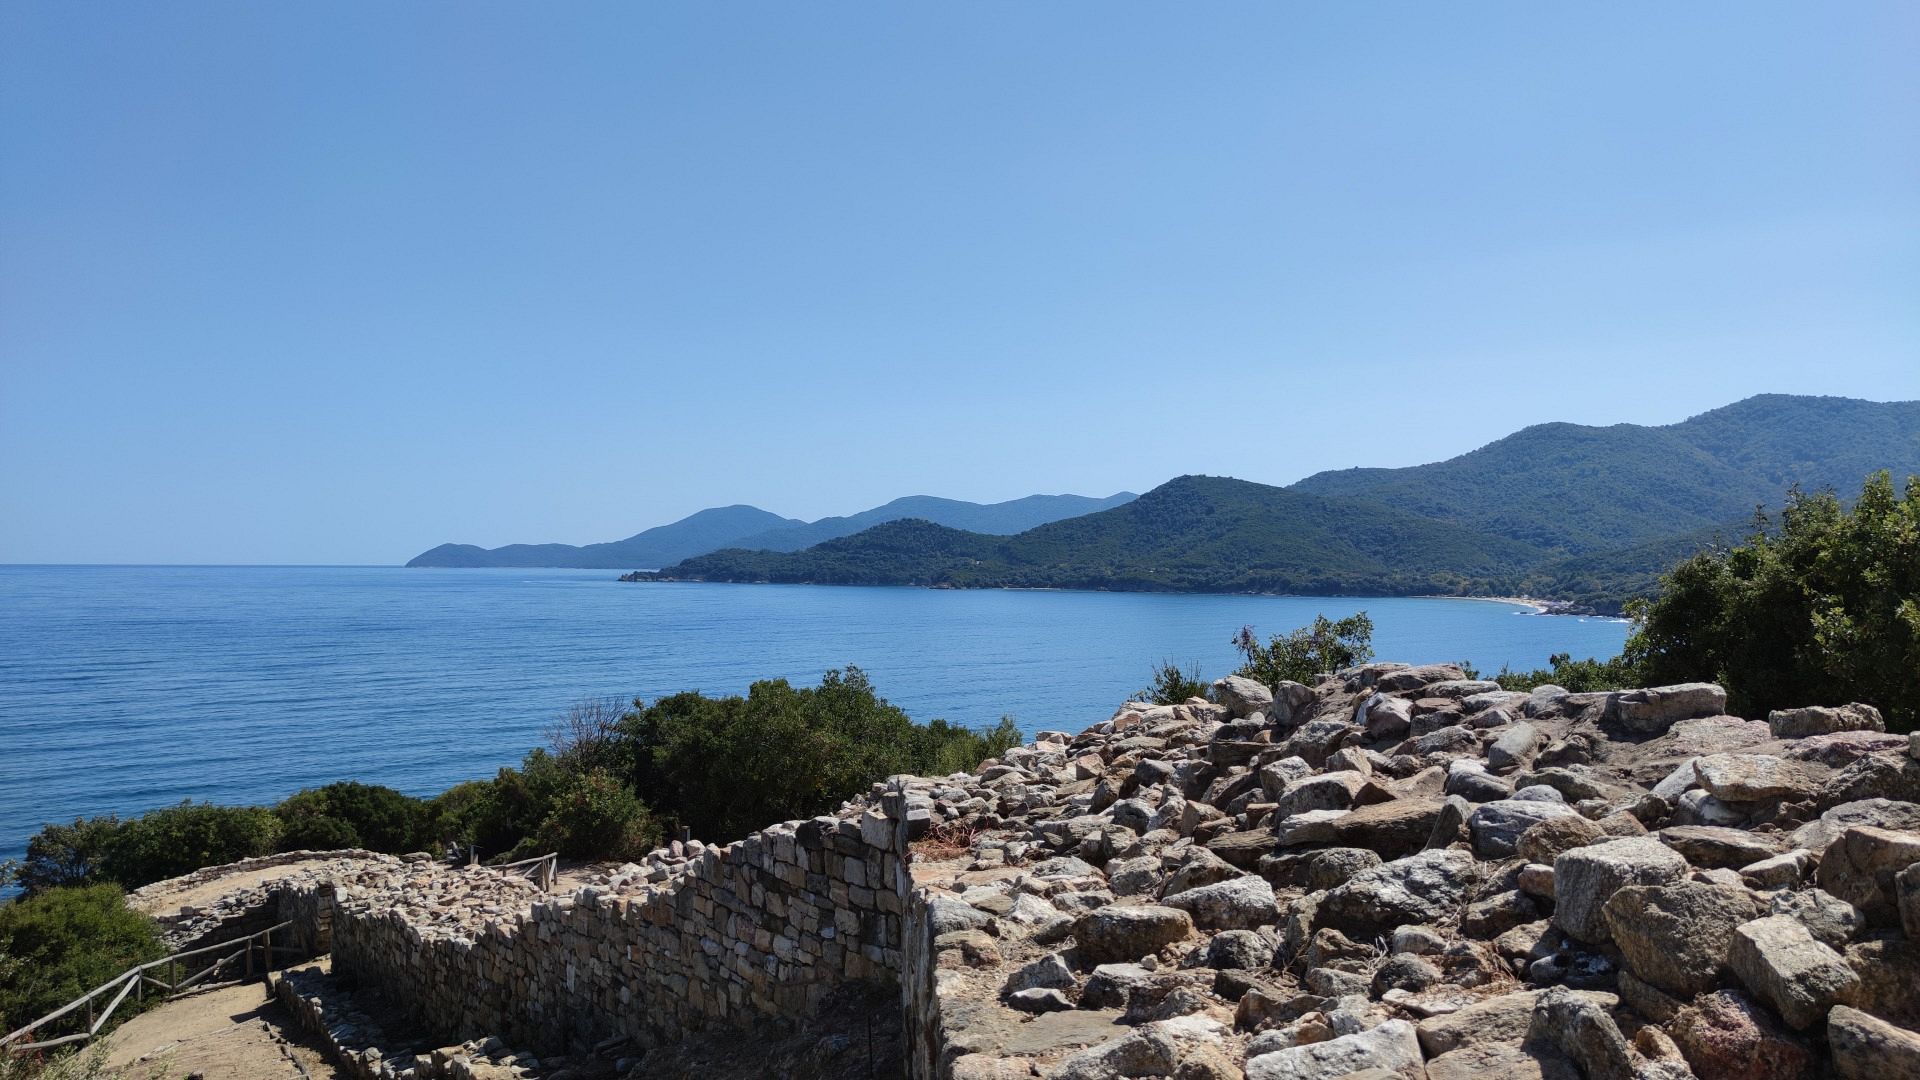 What to see in Halkidiki by car